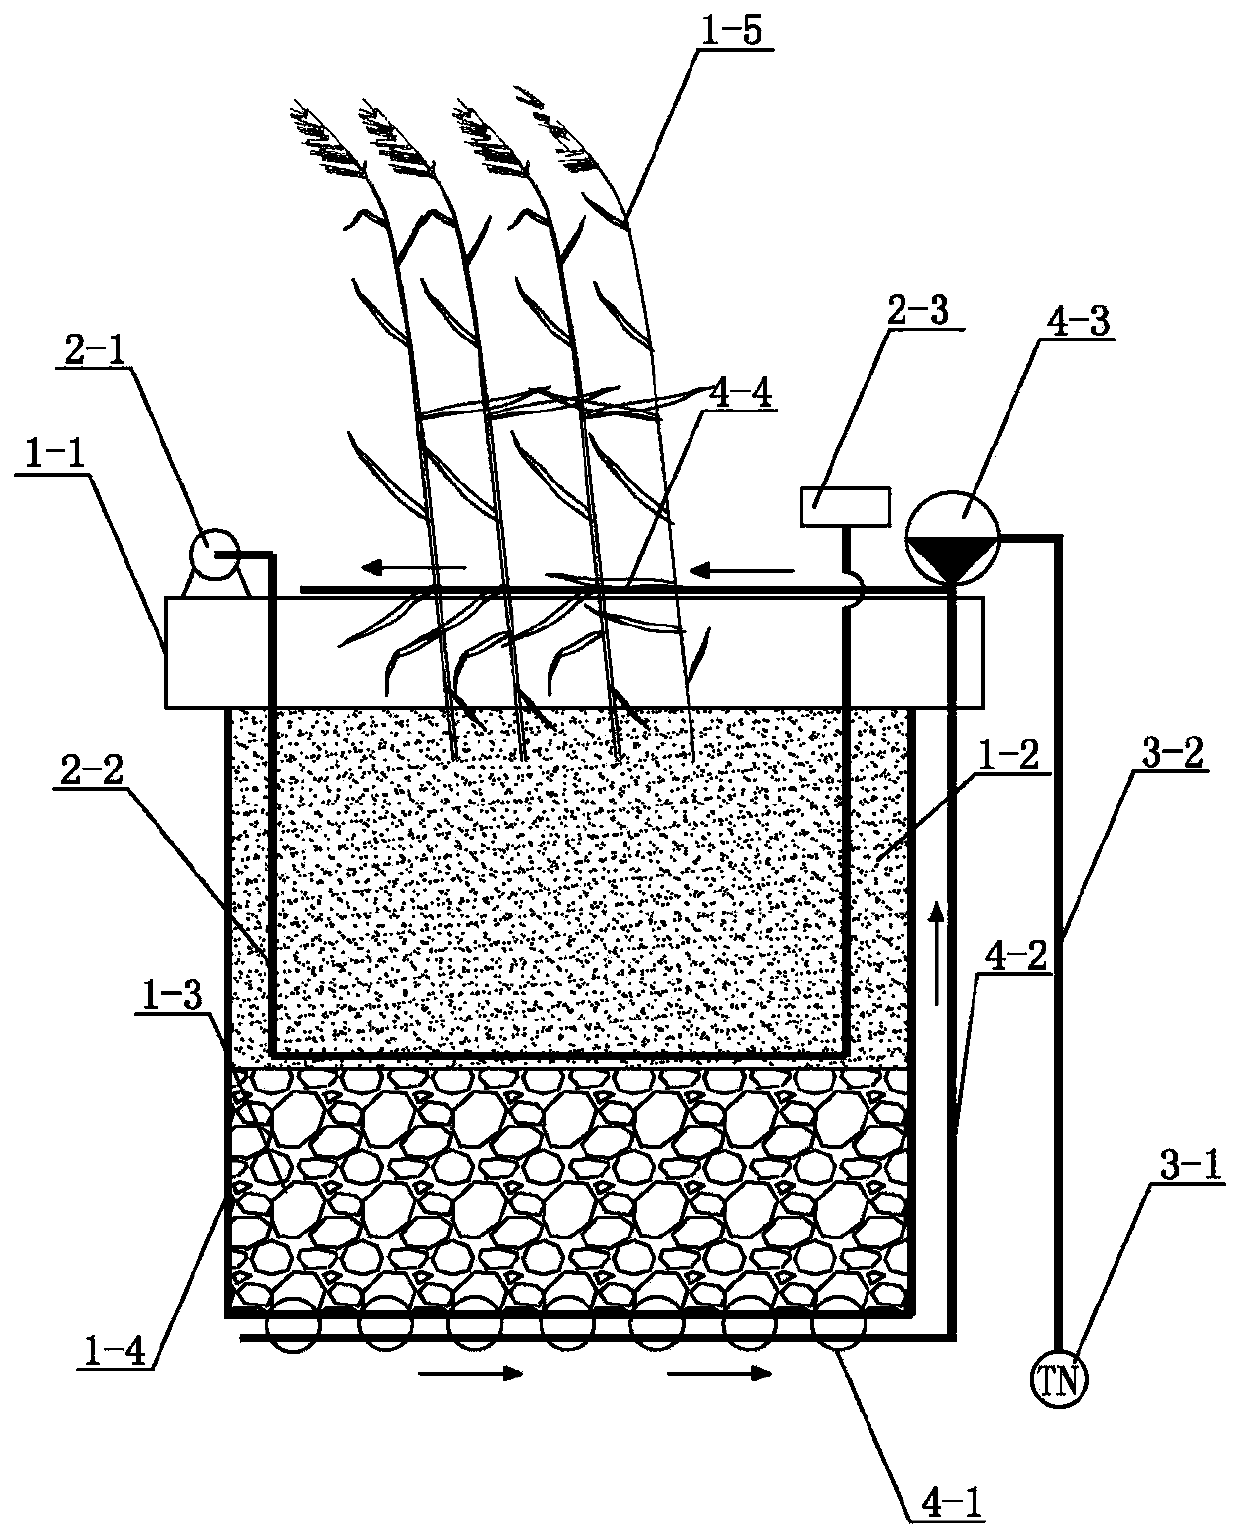 A system and method for automatic and efficient purification of total nitrogen in water body